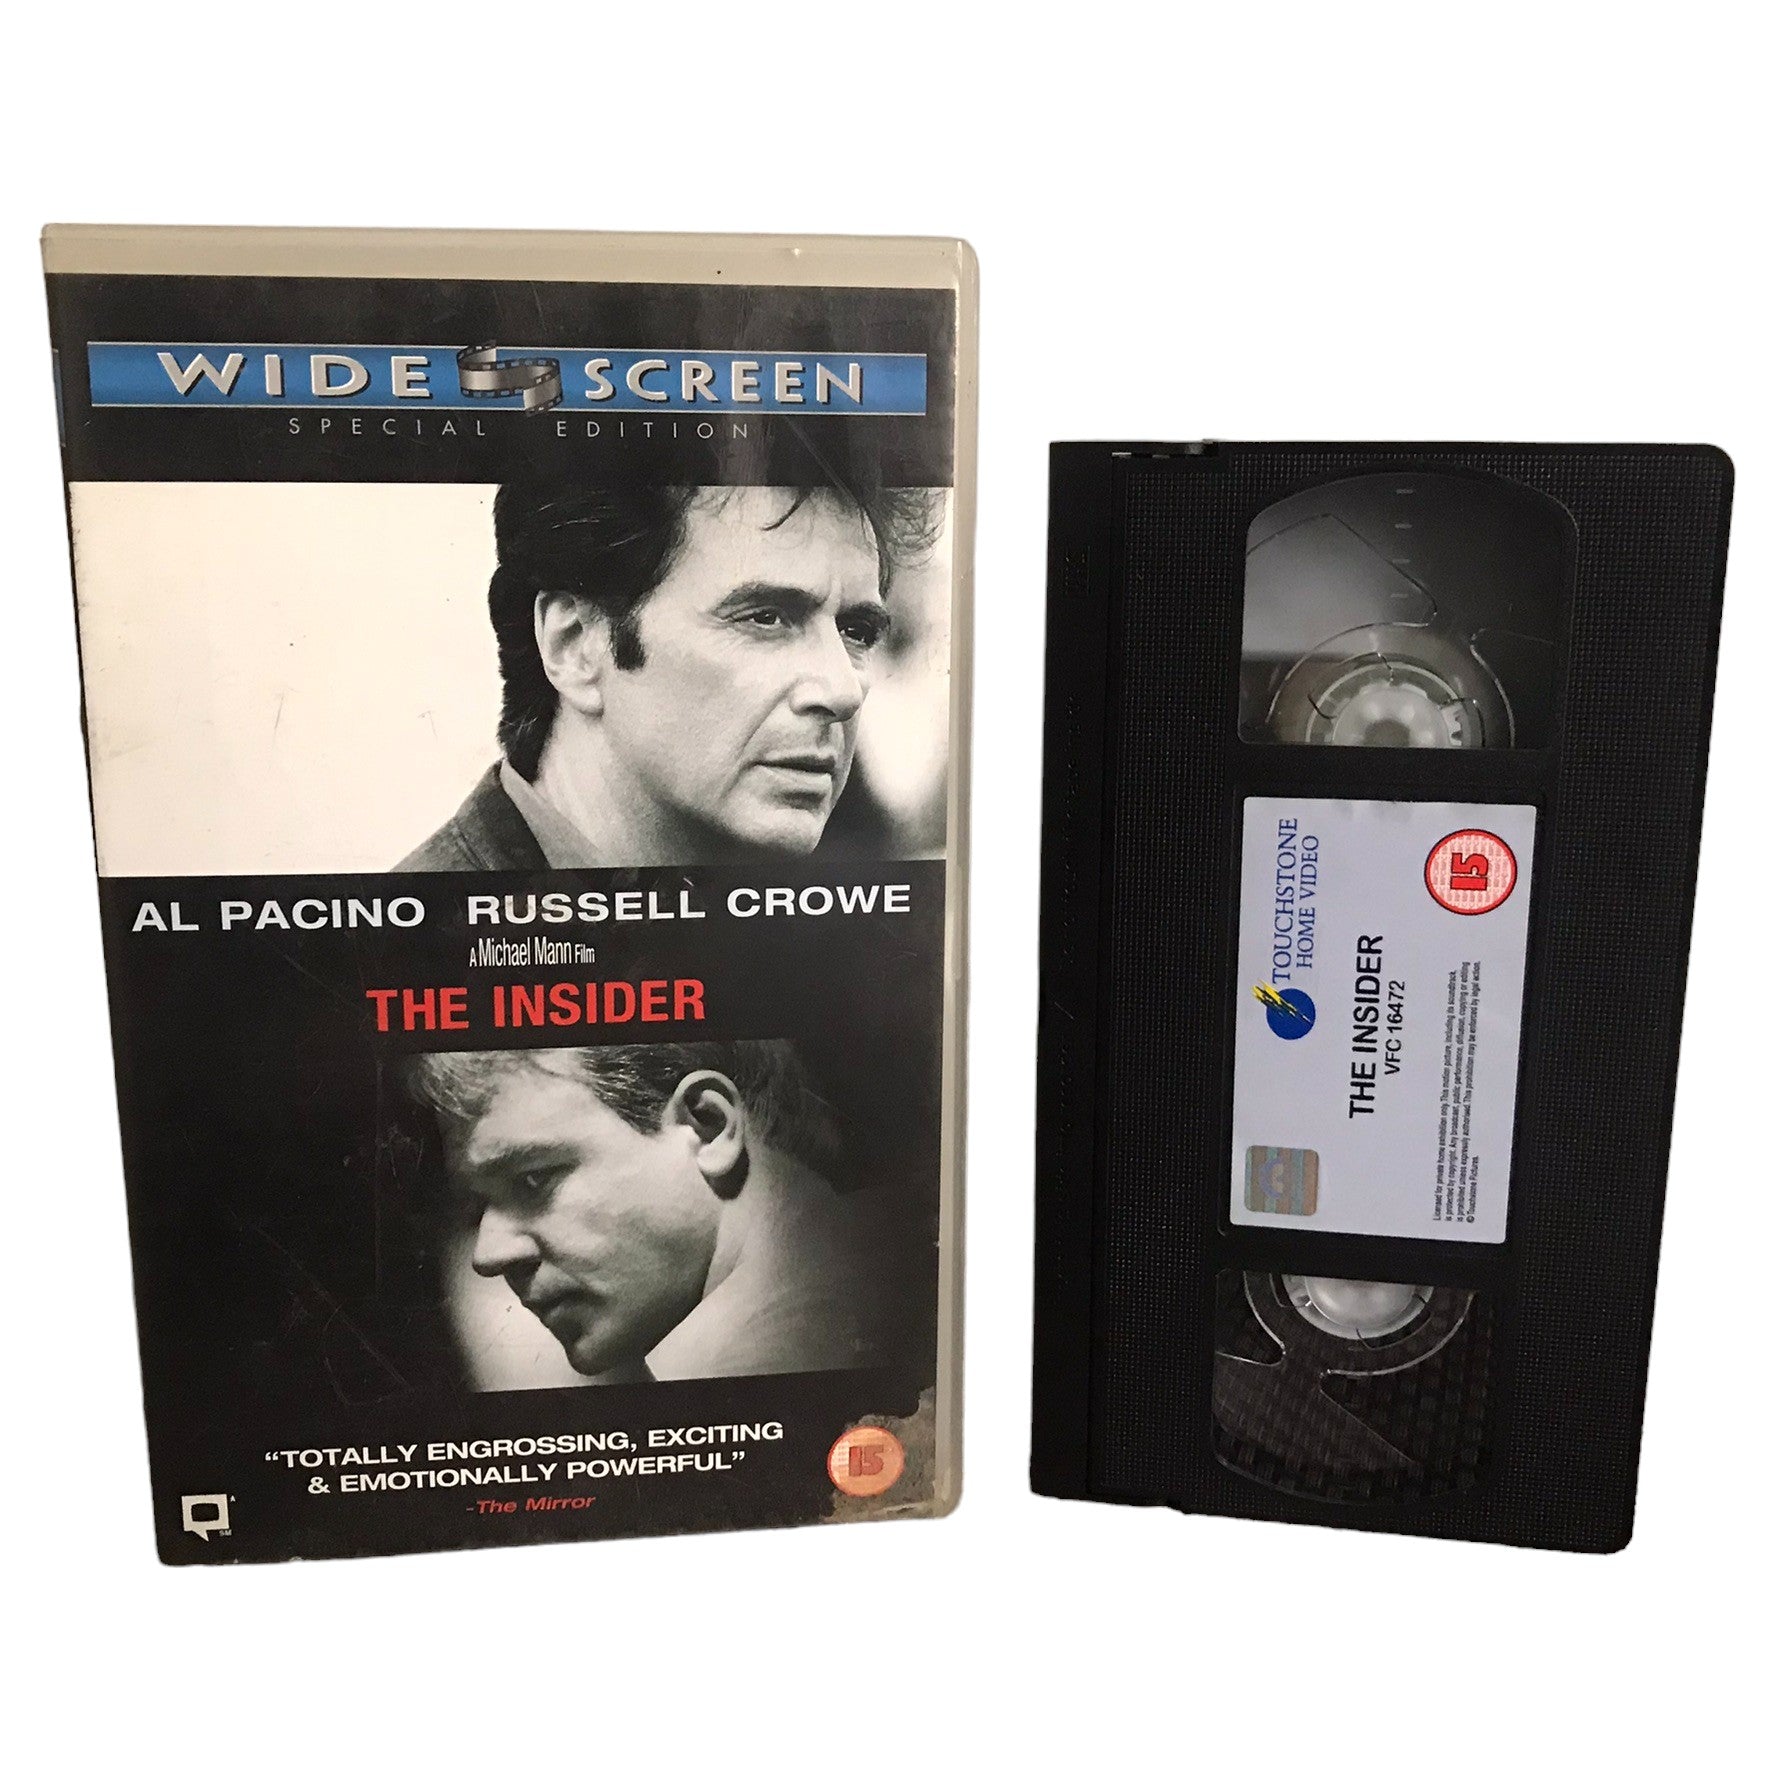 The Insider - Al Pacino - TouchStone Home Video - Large Box - Pal - VHS-